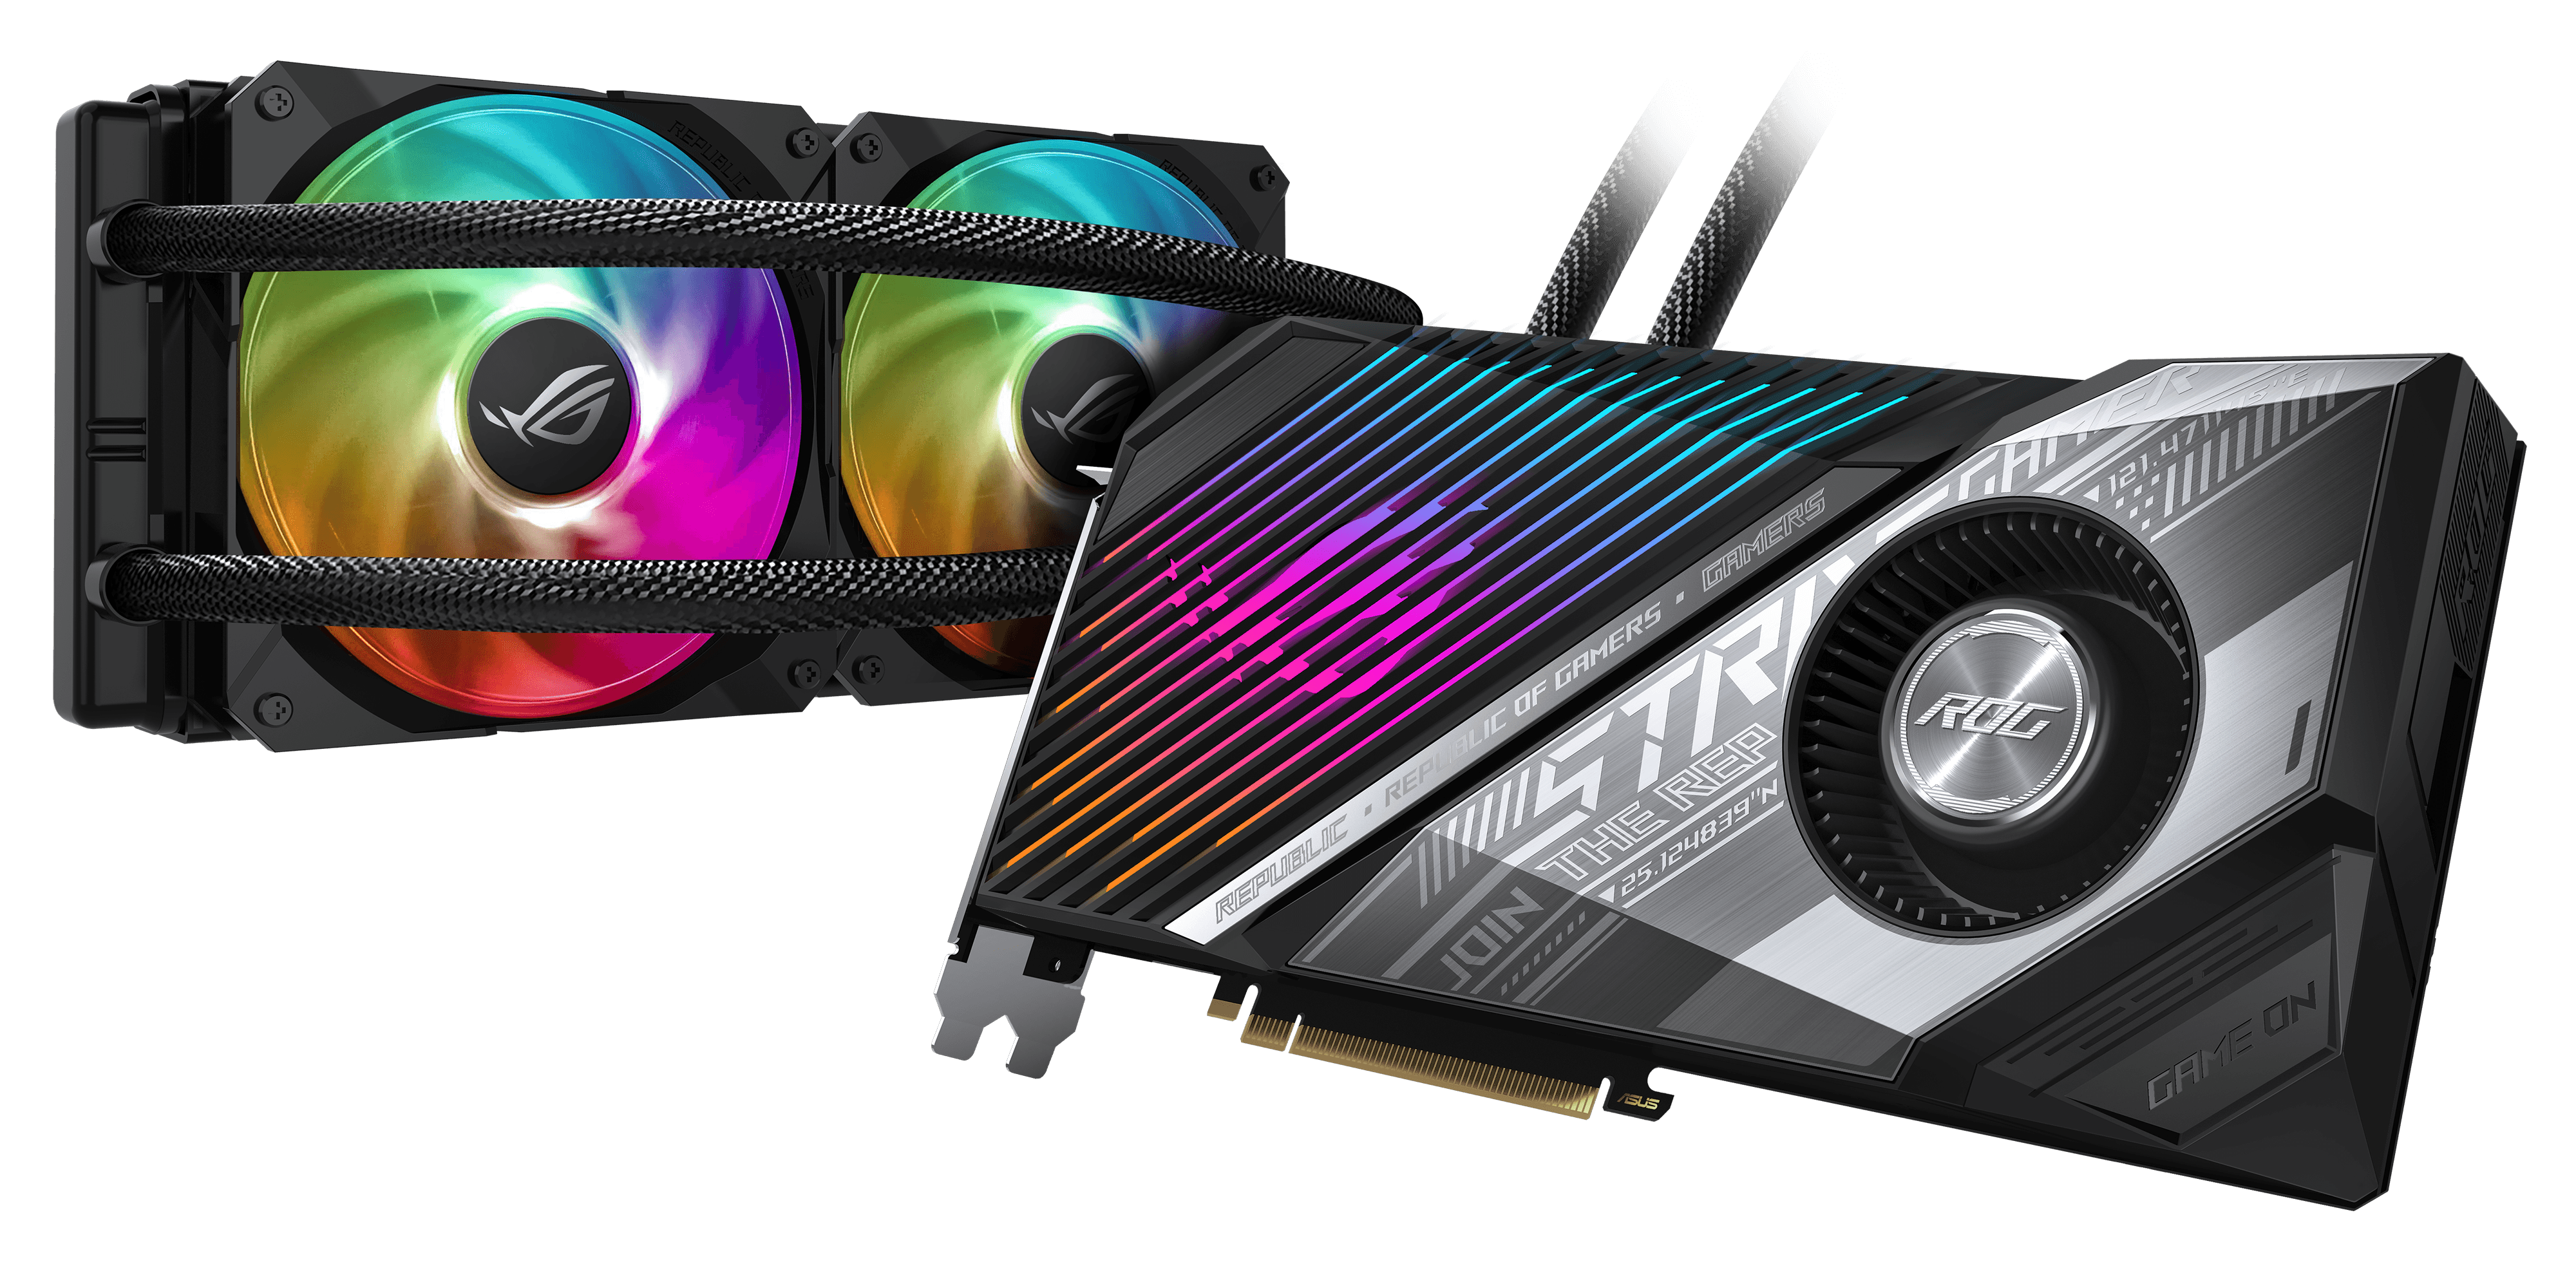 ASUS Announces ROG Strix and TUF Gaming Radeon™ RX 6800 Series Graphics Cards